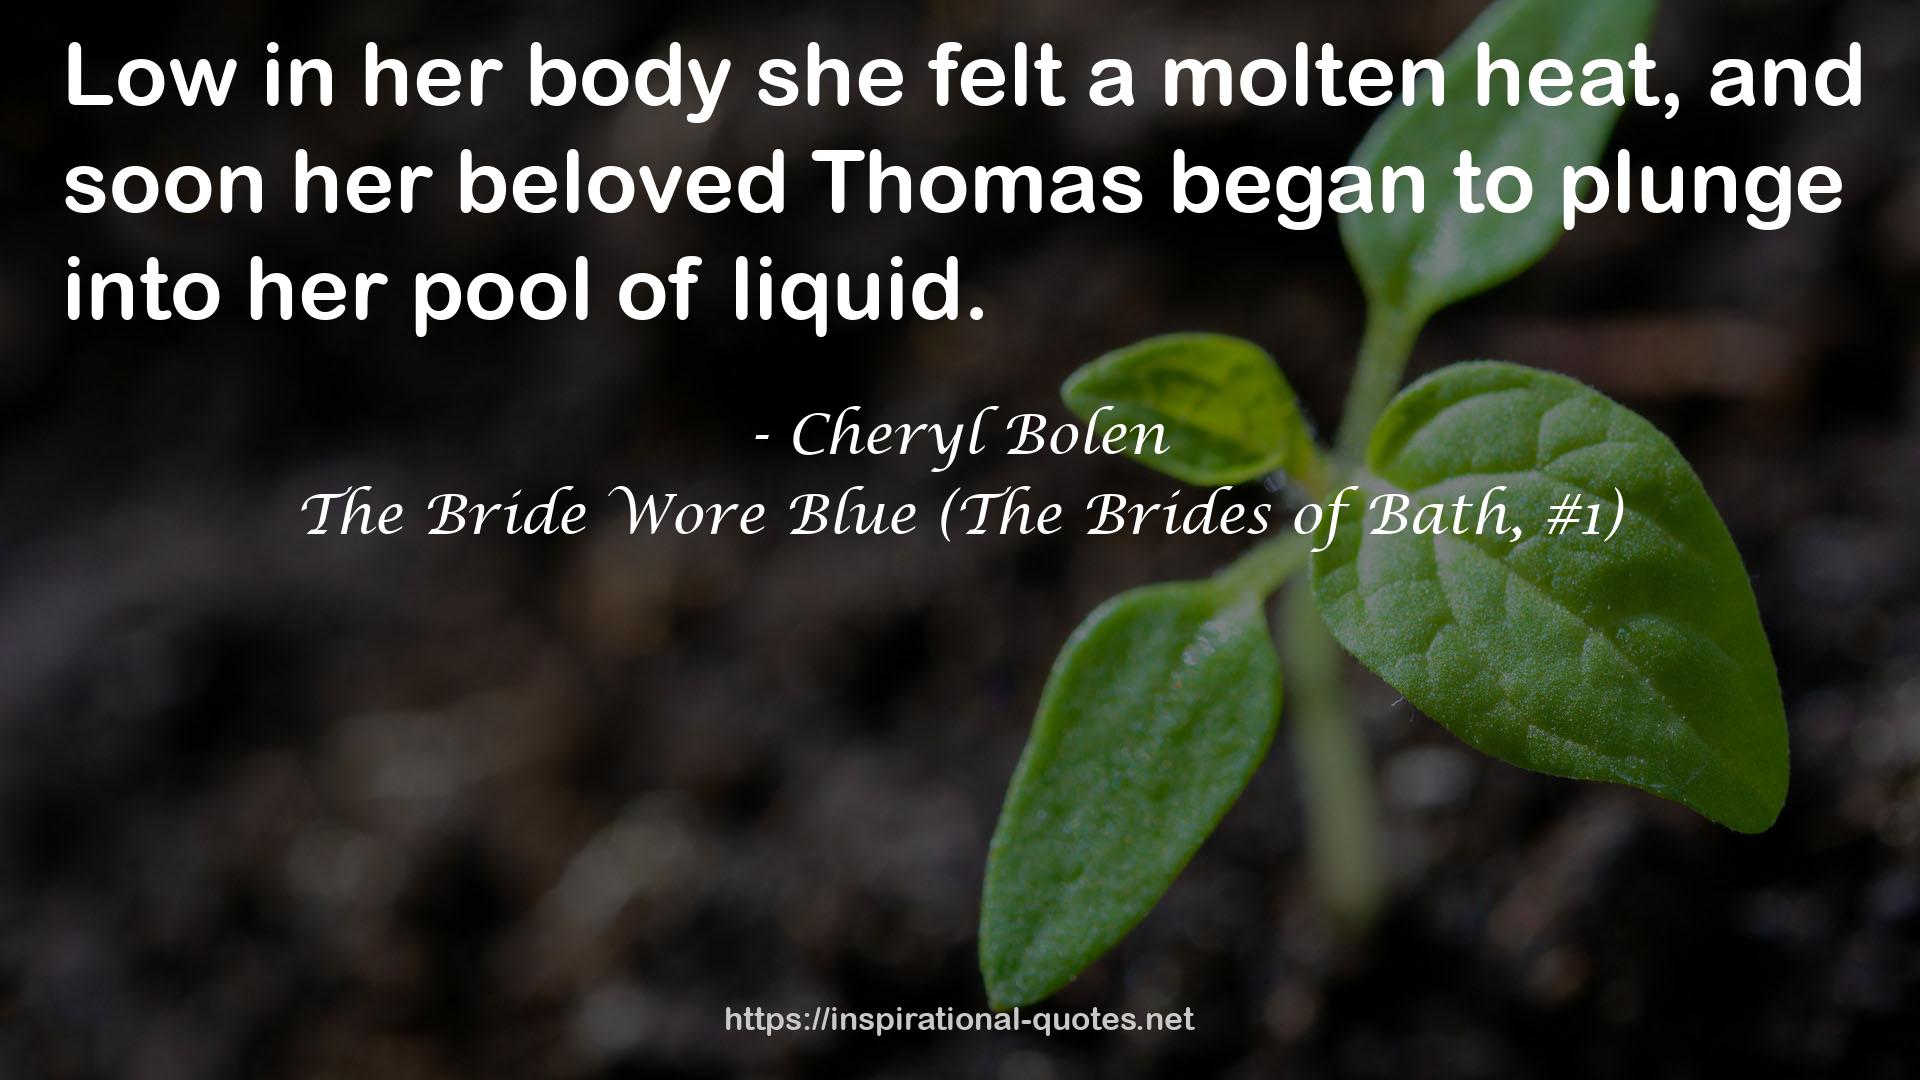 The Bride Wore Blue (The Brides of Bath, #1) QUOTES